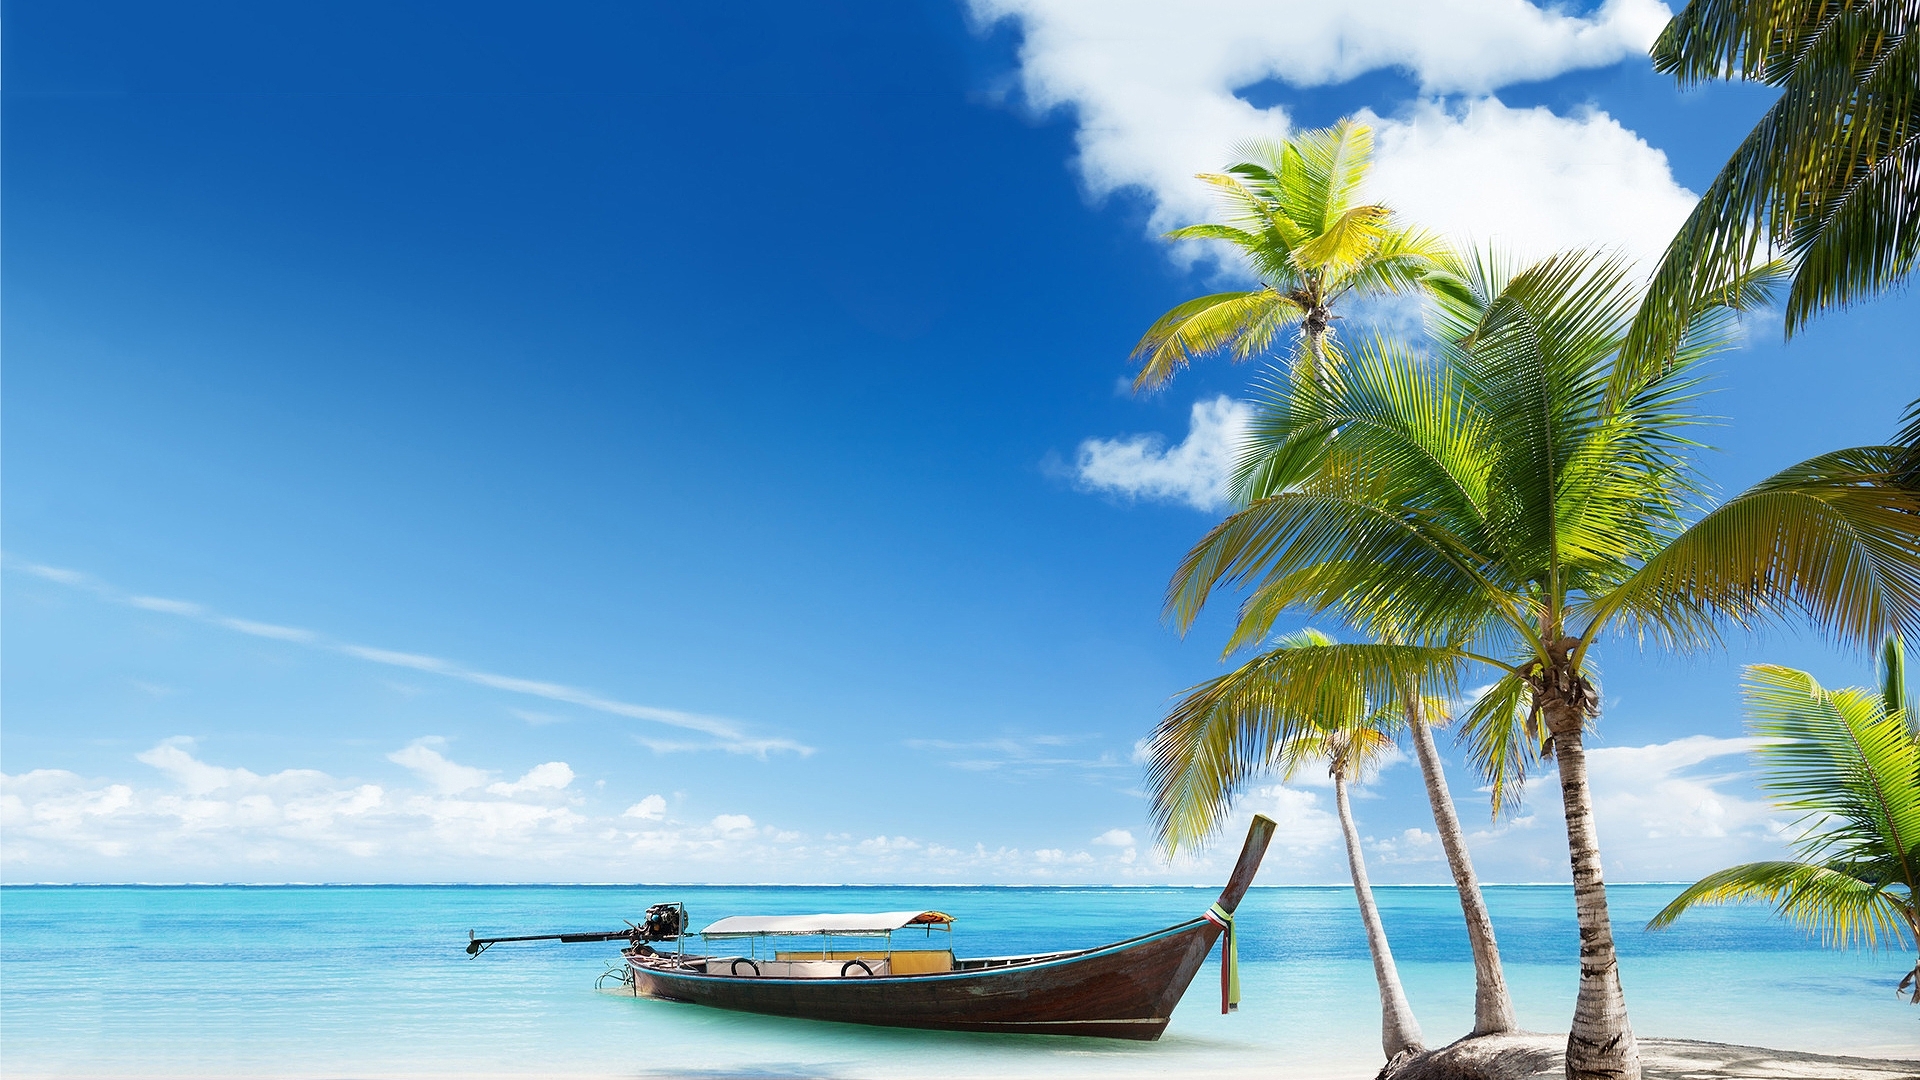 Gallery For > Paradise Island Wallpaper